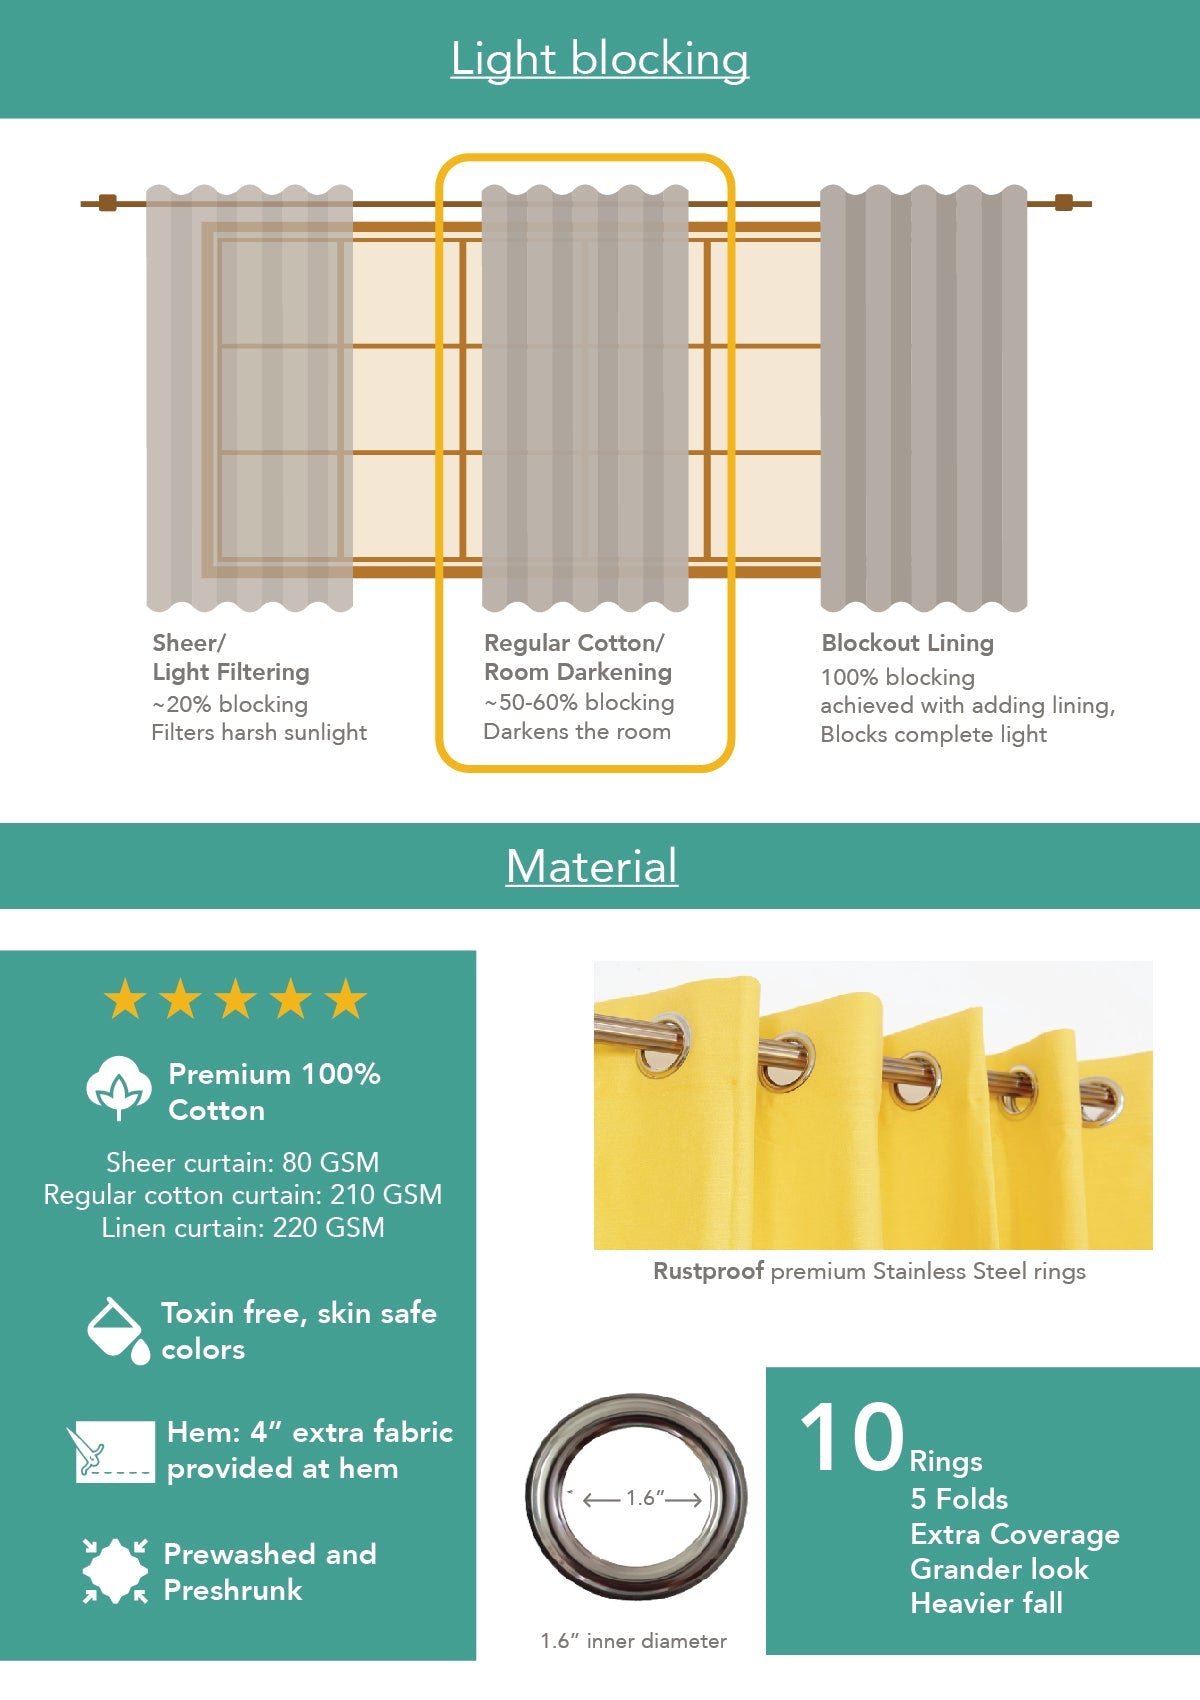 Solid Mustard cotton curtain with Terrazo patch geometric 100% cotton curtains for living room - Set of 4